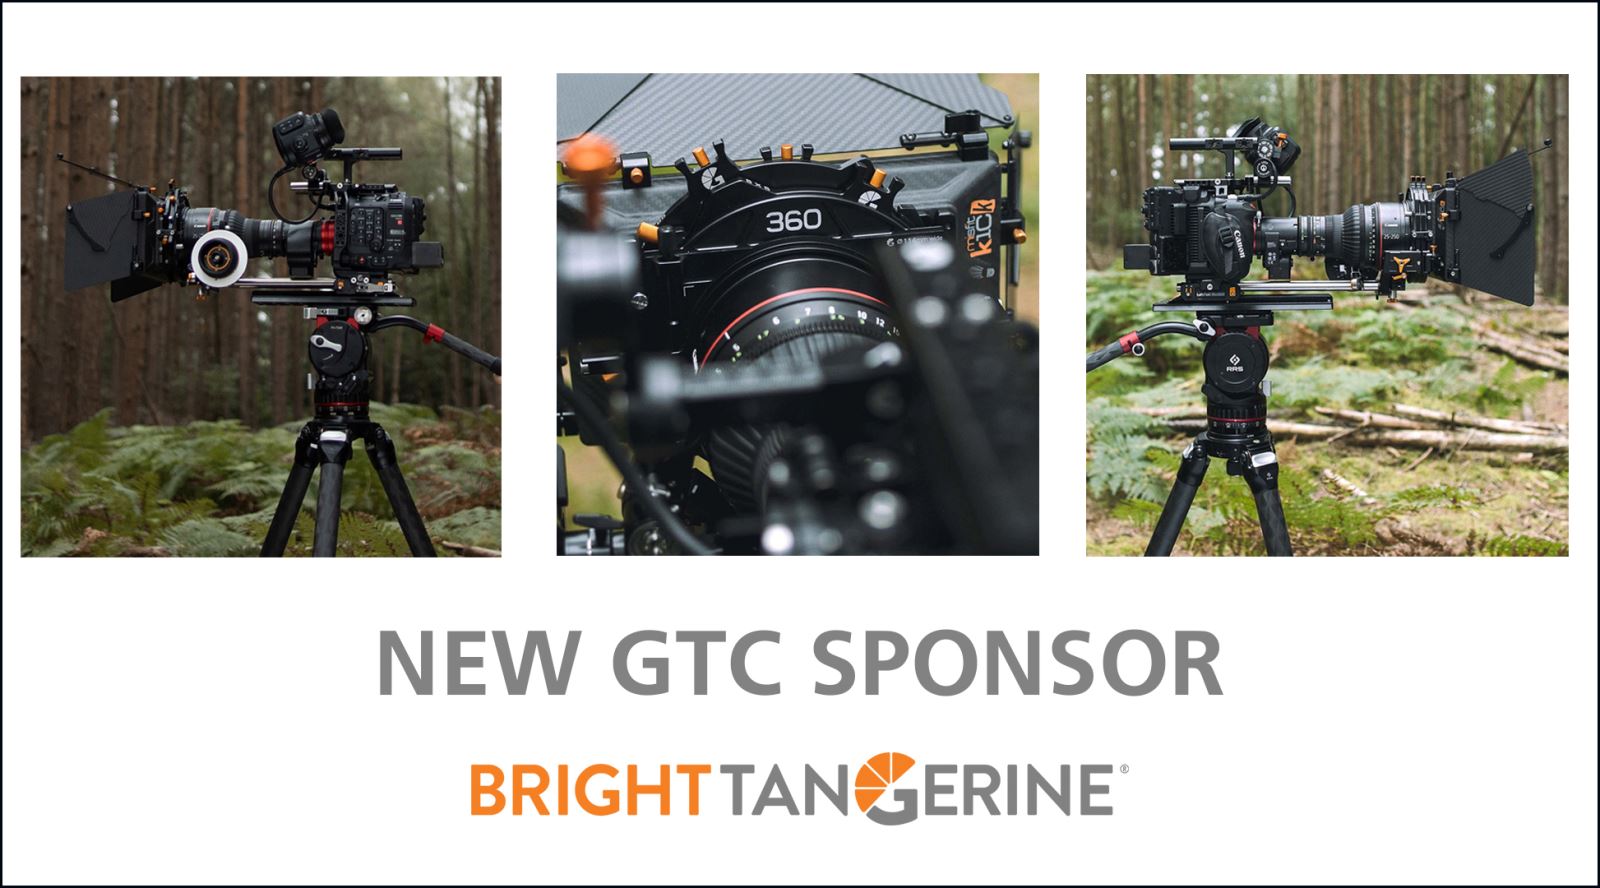 The GTC would like to welcome Bright Tangerine as a new sponsor company